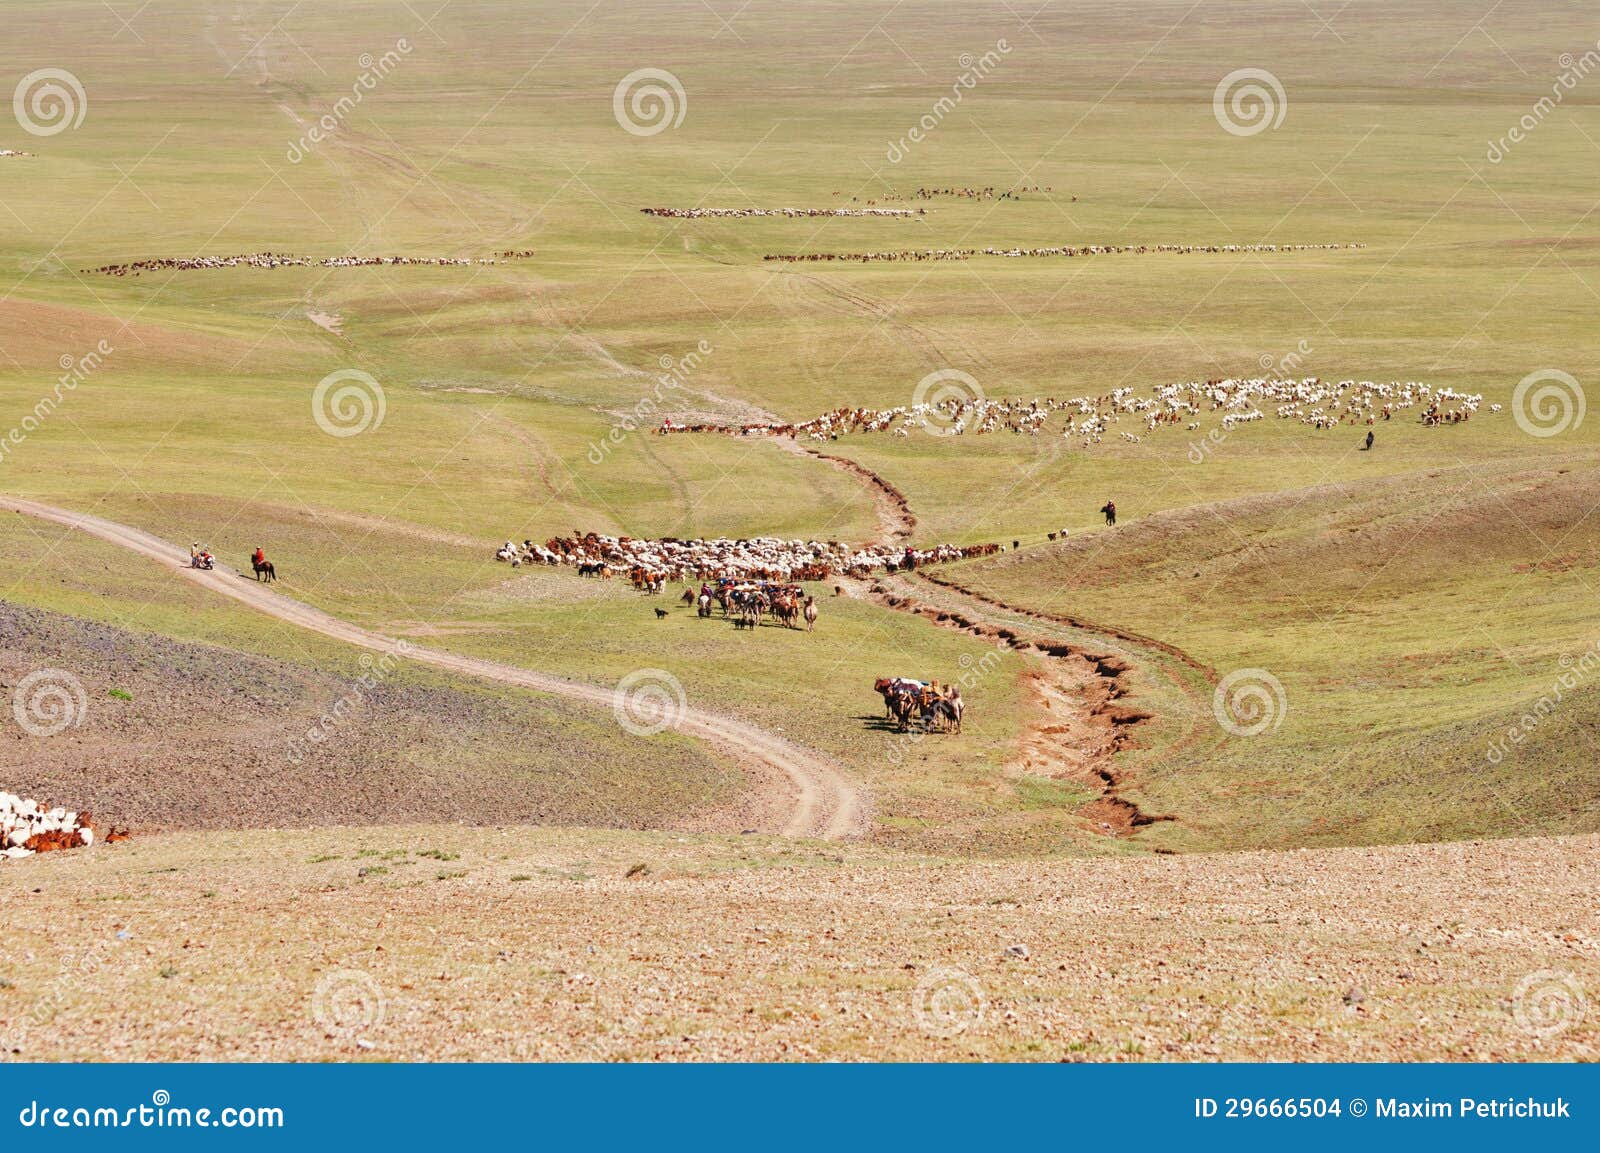 herds of sheep migrate in mongolia